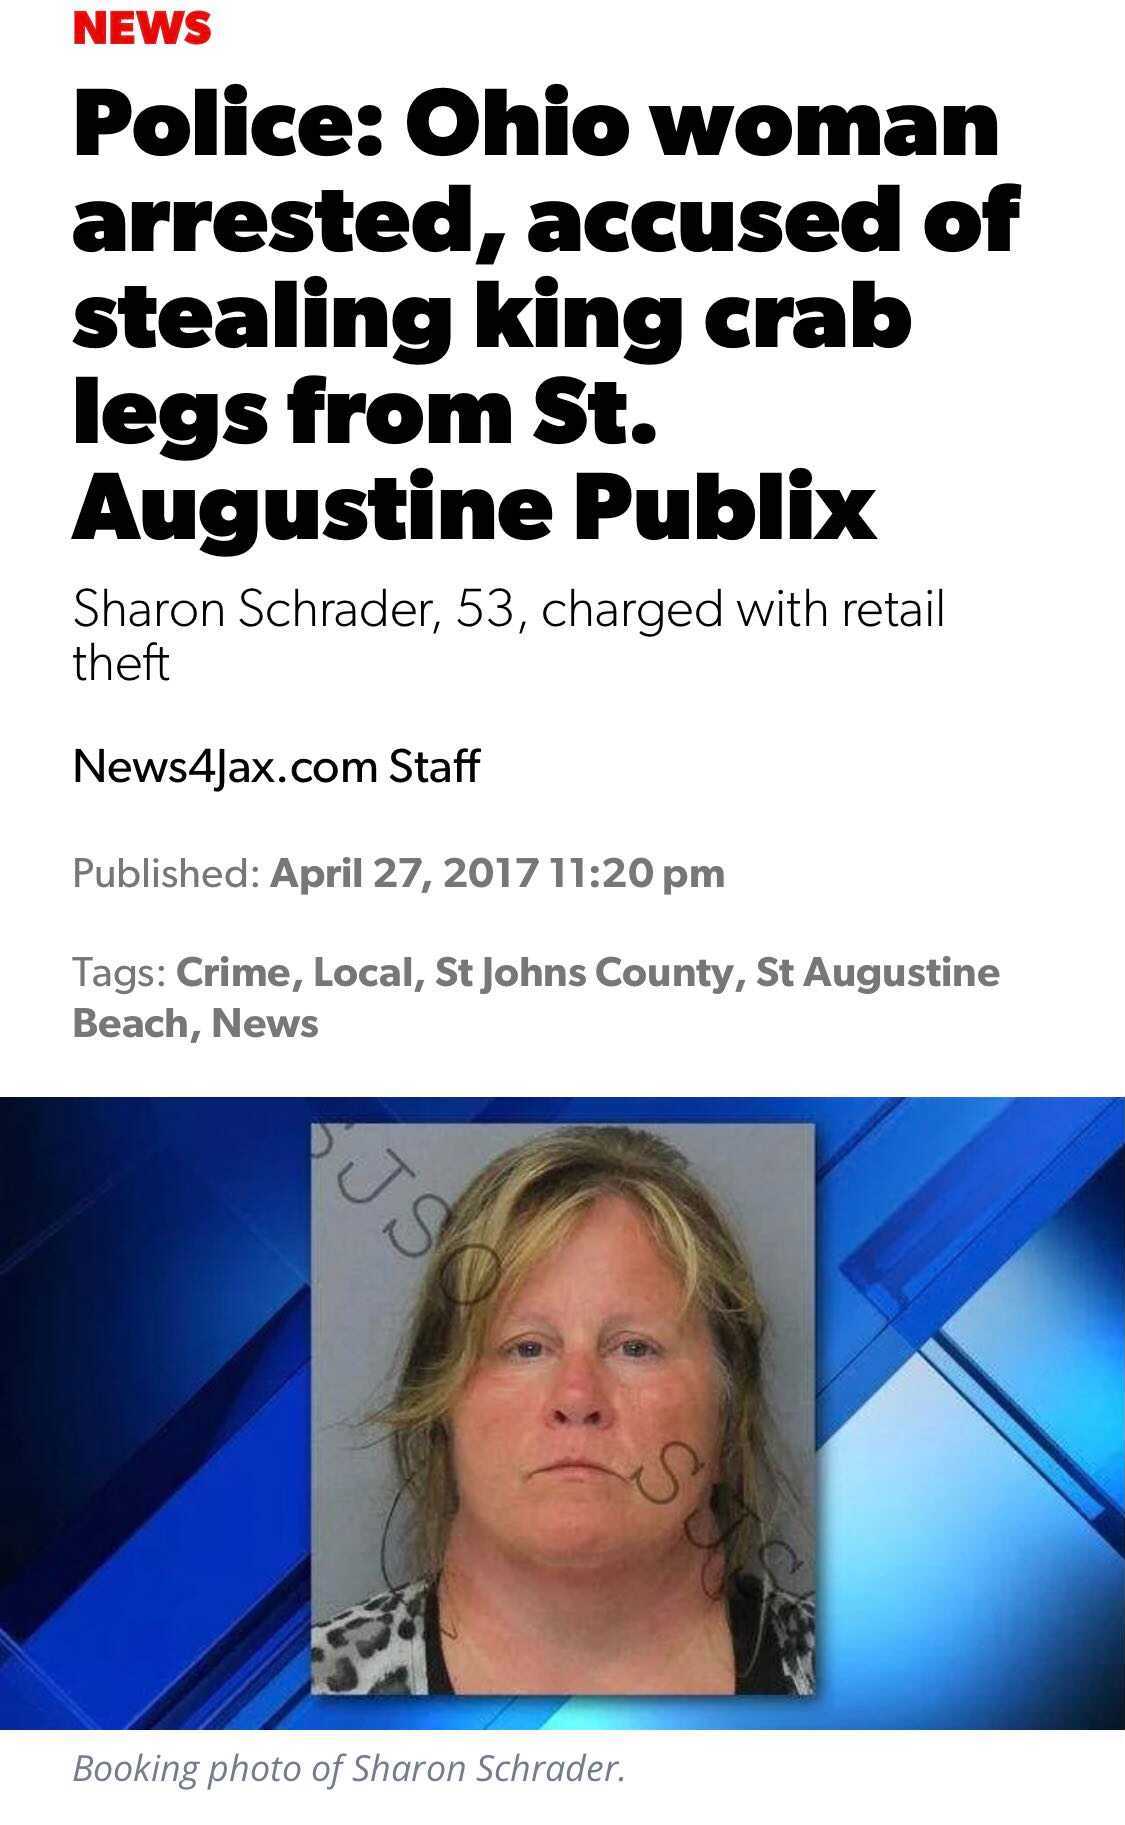 head - News Police Ohio woman arrested, accused of stealing king crab legs from St. Augustine Publix Sharon Schrader, 53, charged with retail theft News4Jax.com Staff Published Tags Crime, Local, St Johns County, St Augustine Beach, News Js Ss Booking pho